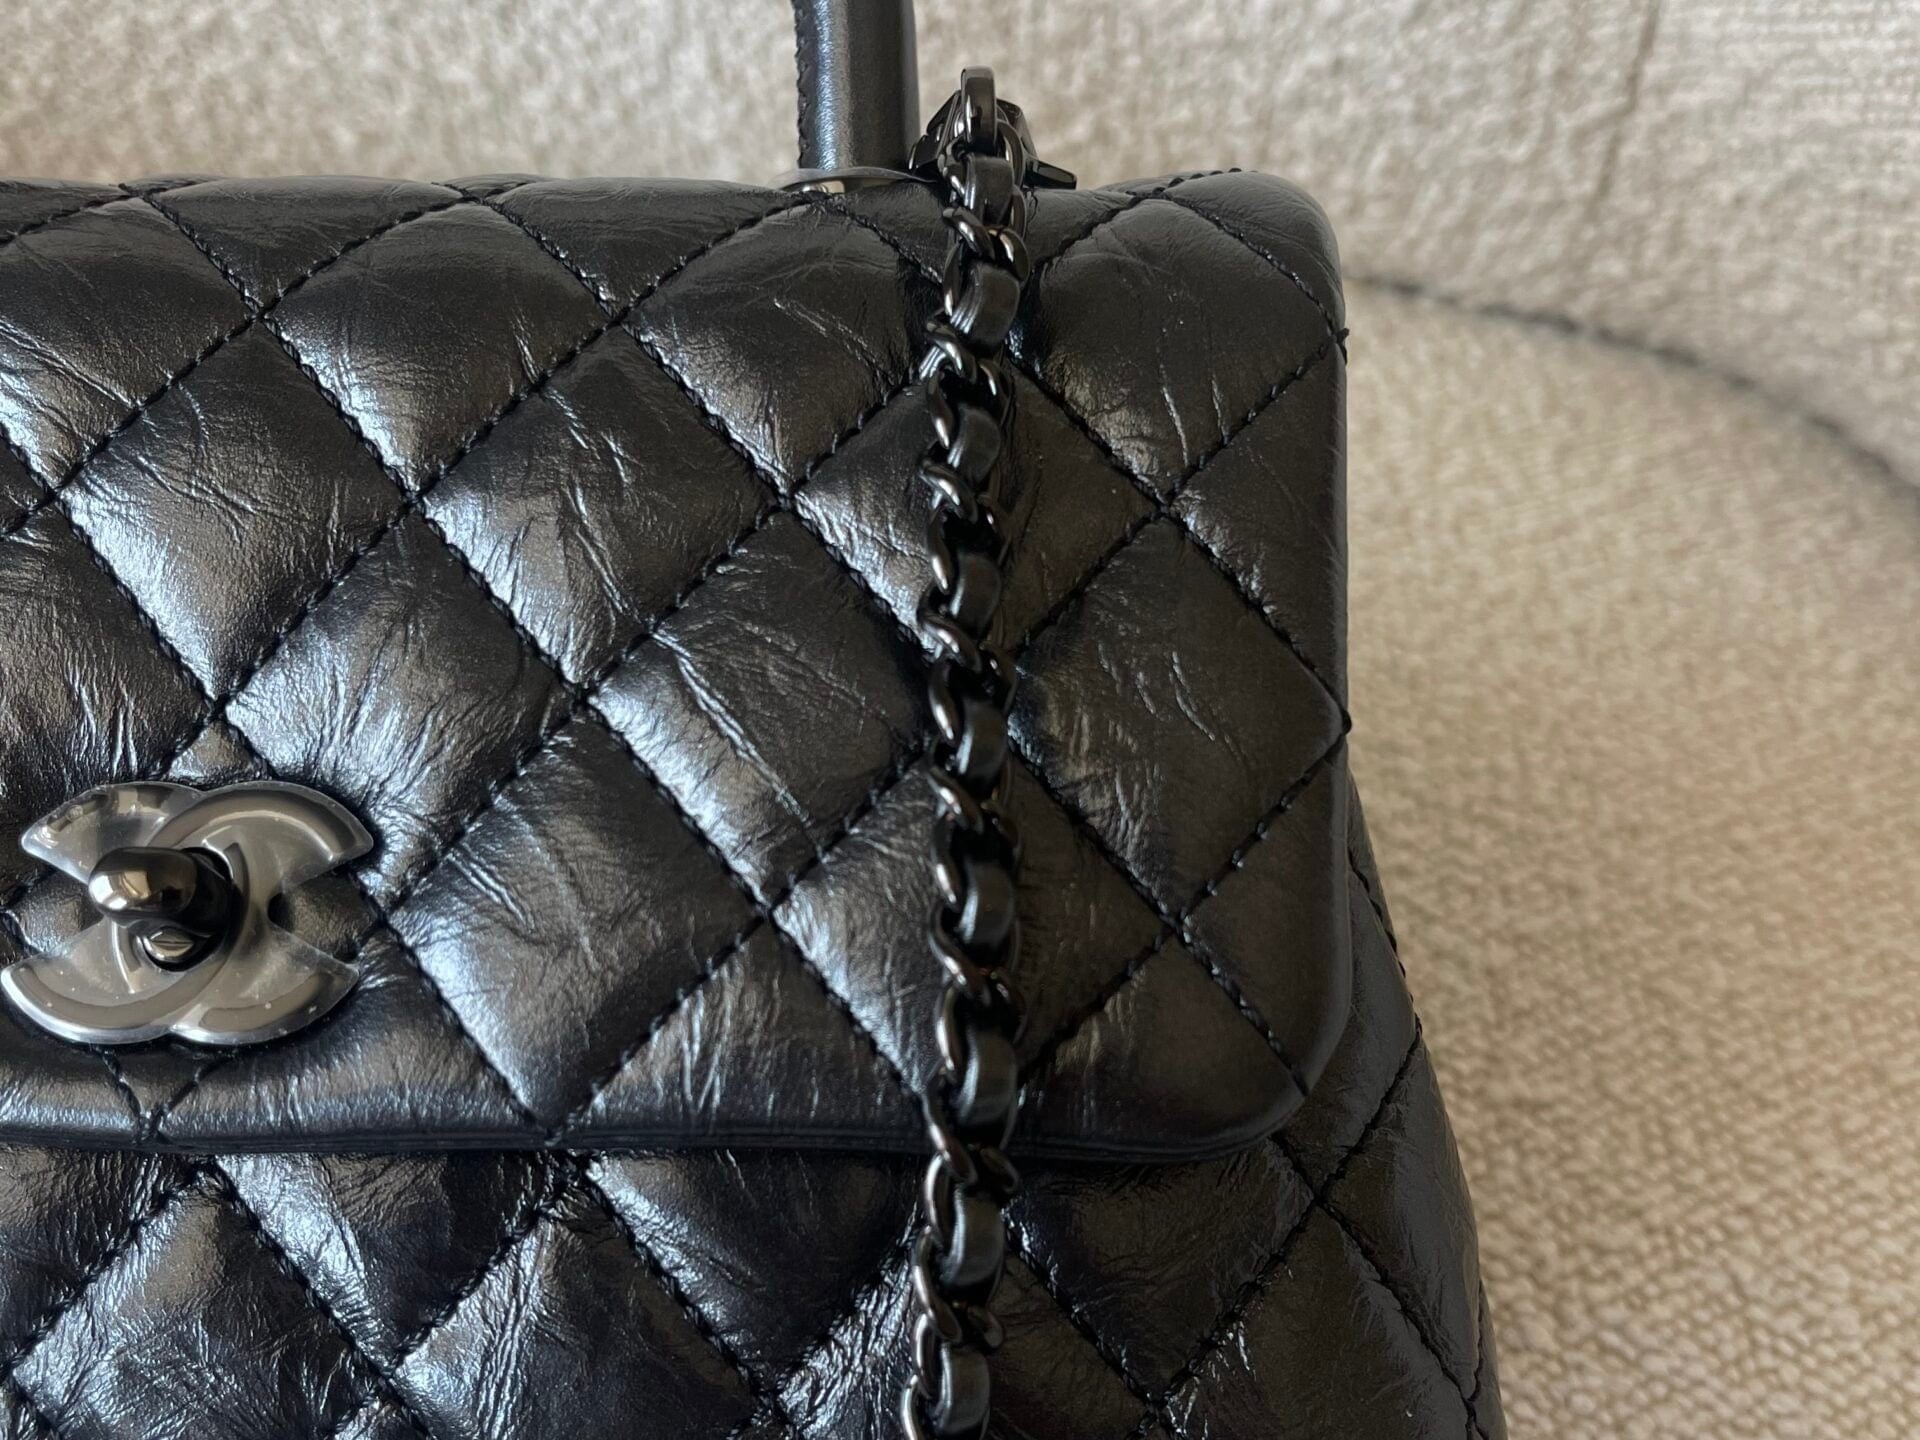 CHANEL Handbag 20P So Black Calfskin Quilted Coco Handle Small with Black Hardware - Redeluxe